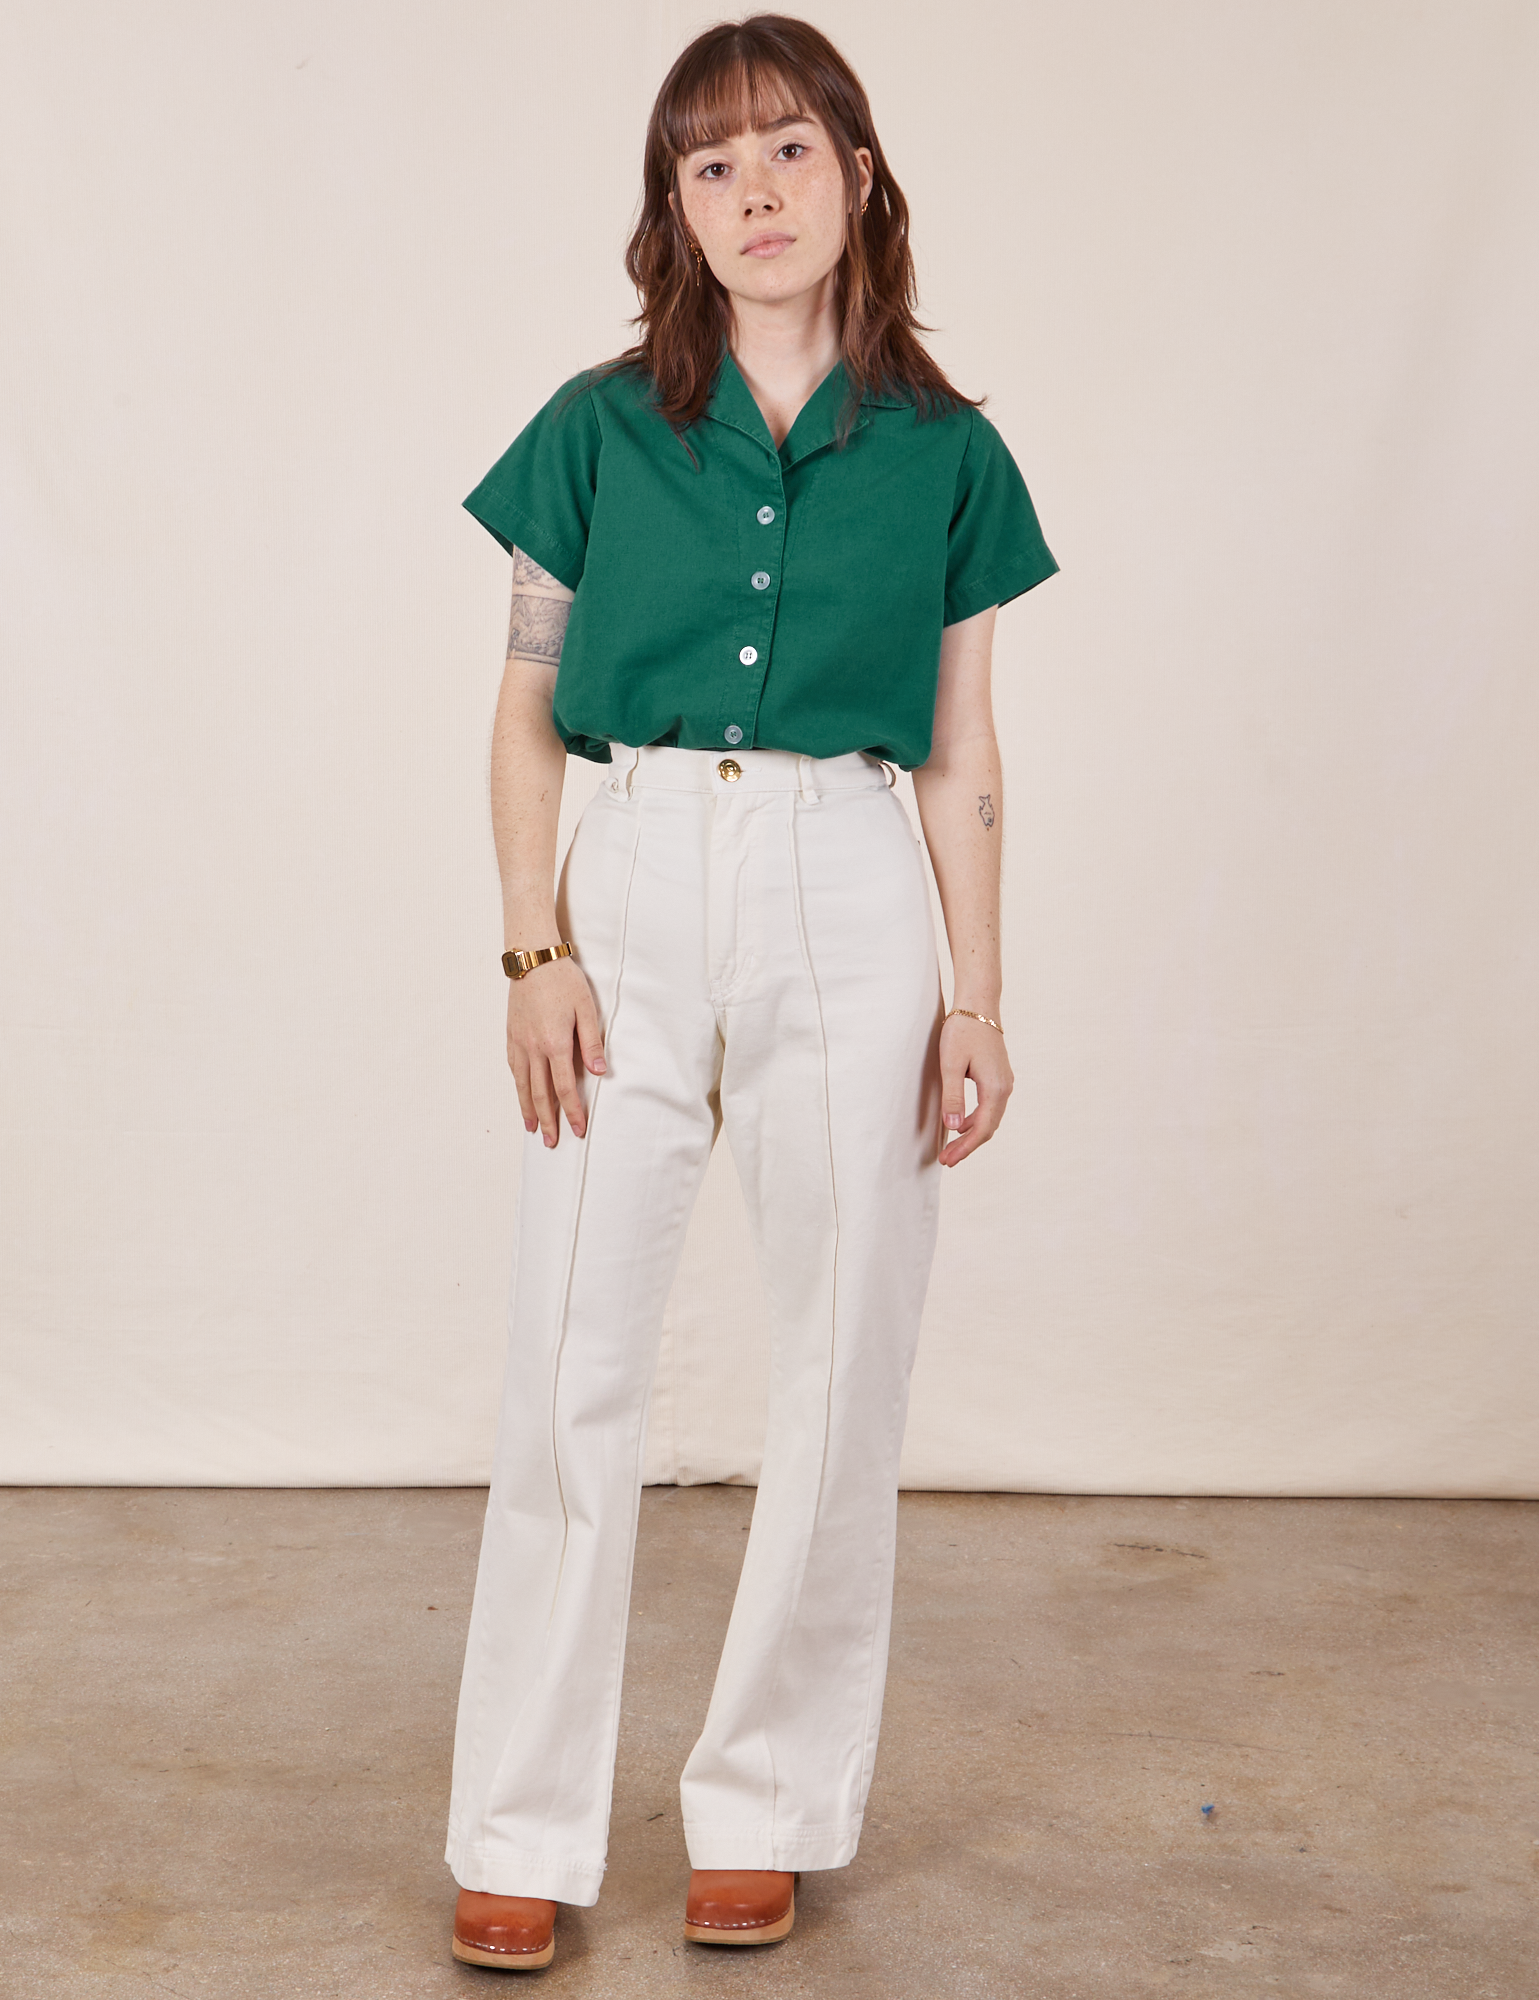 Hana is wearing Pantry Button-Up in Hunter Green tucked into vintage tee off-white Petite Western Pants